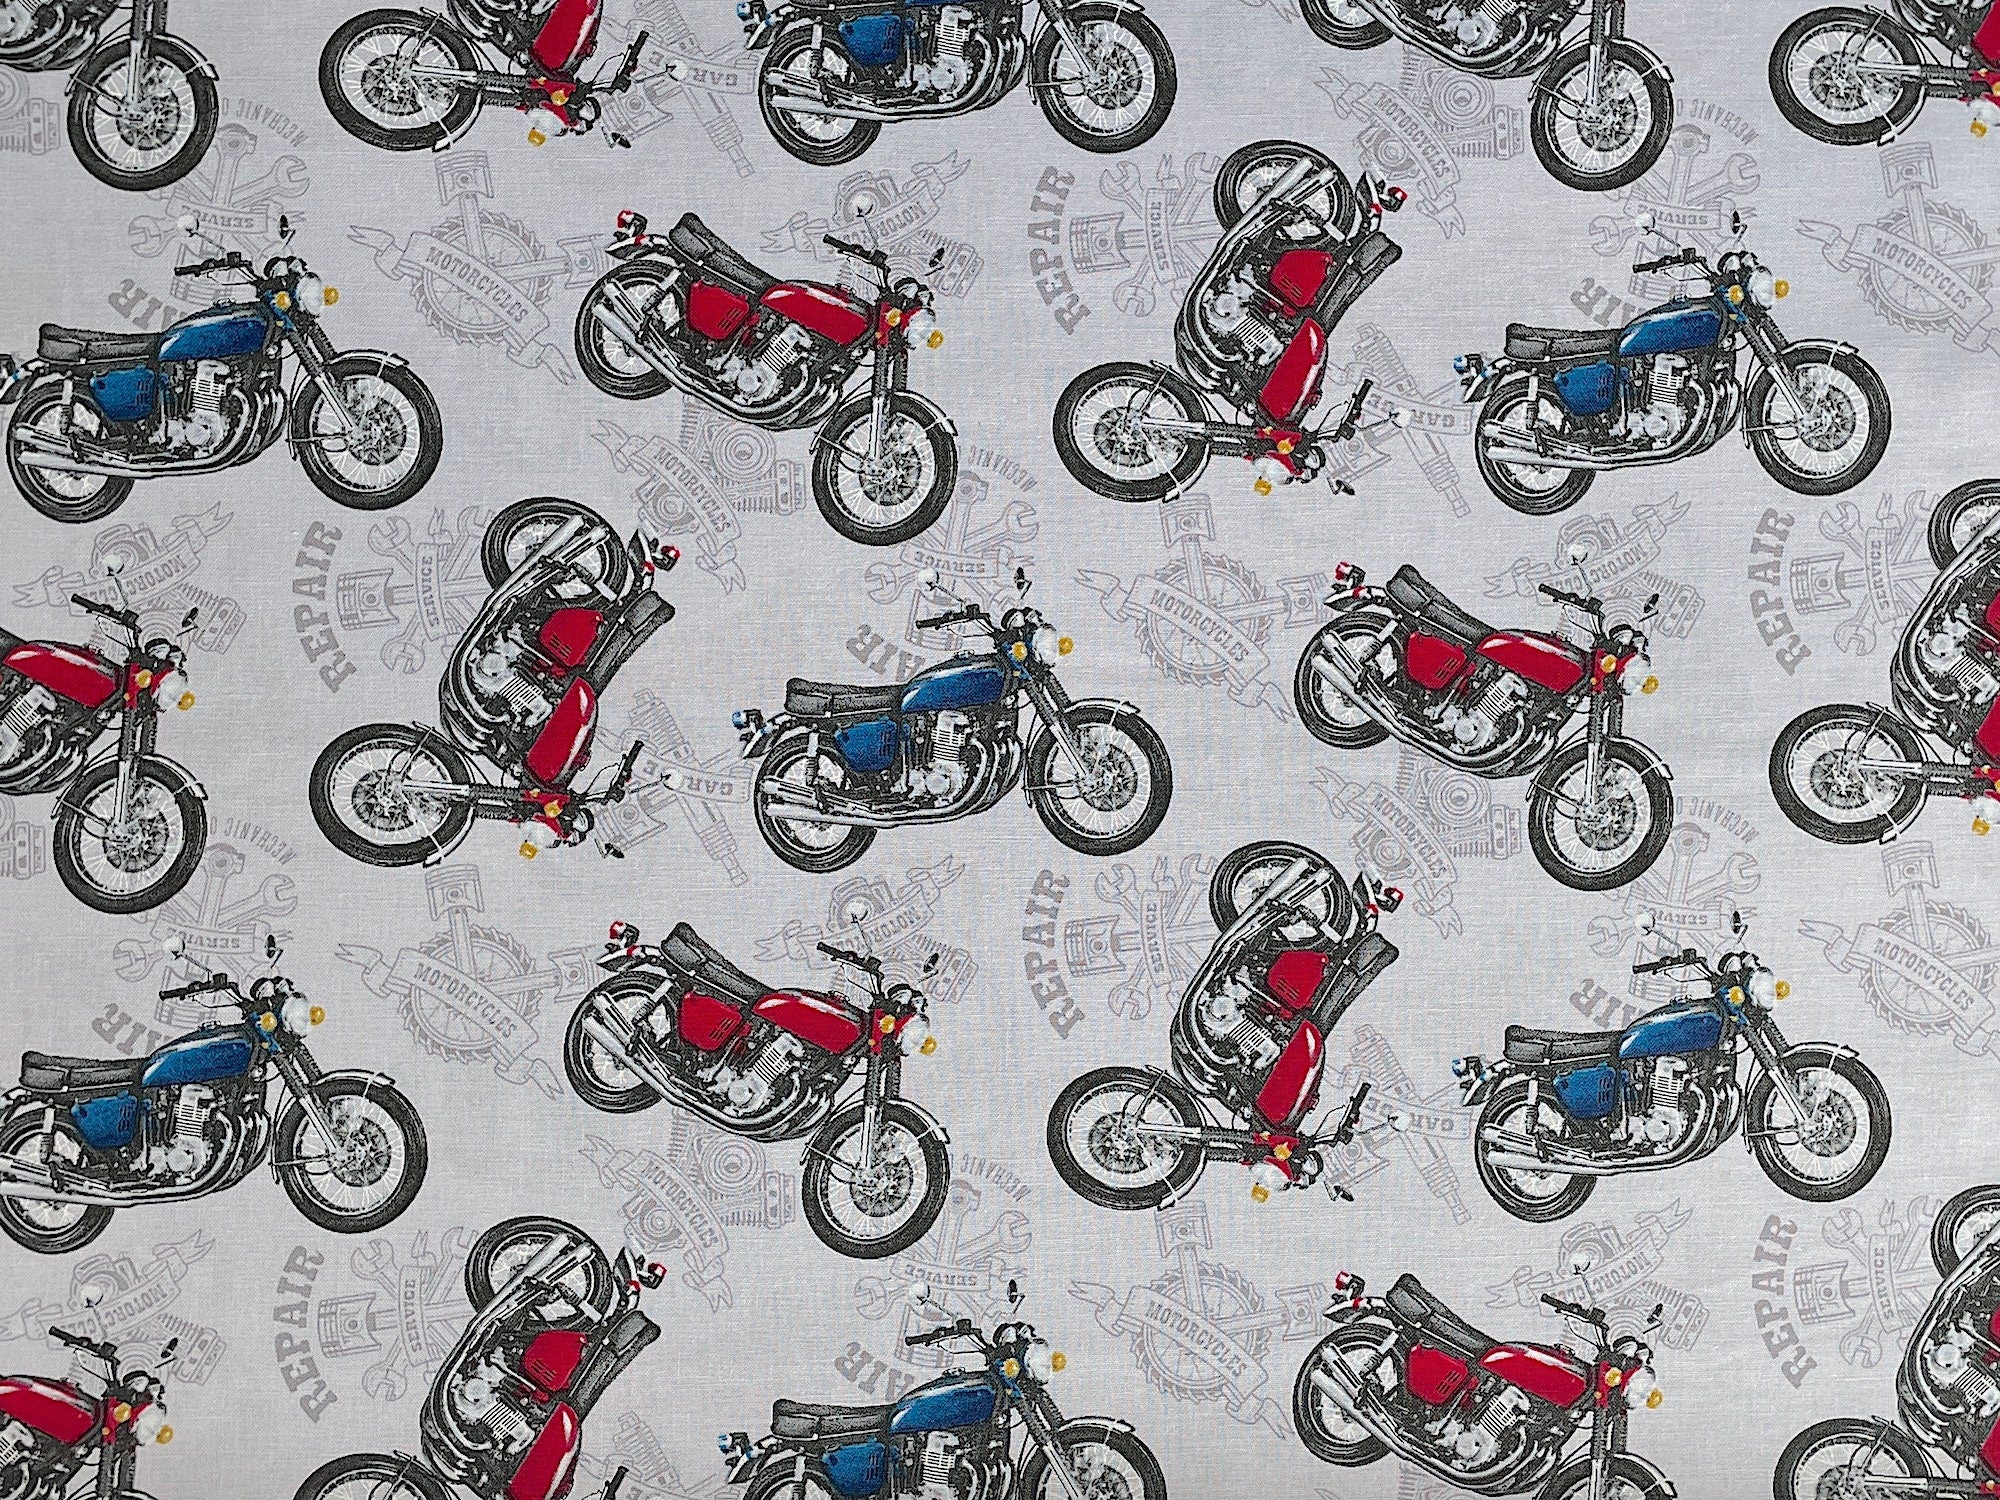 This grey fabric is part of the My Tools My Rules collection. This fabric is covered with red and blue motorcycles.